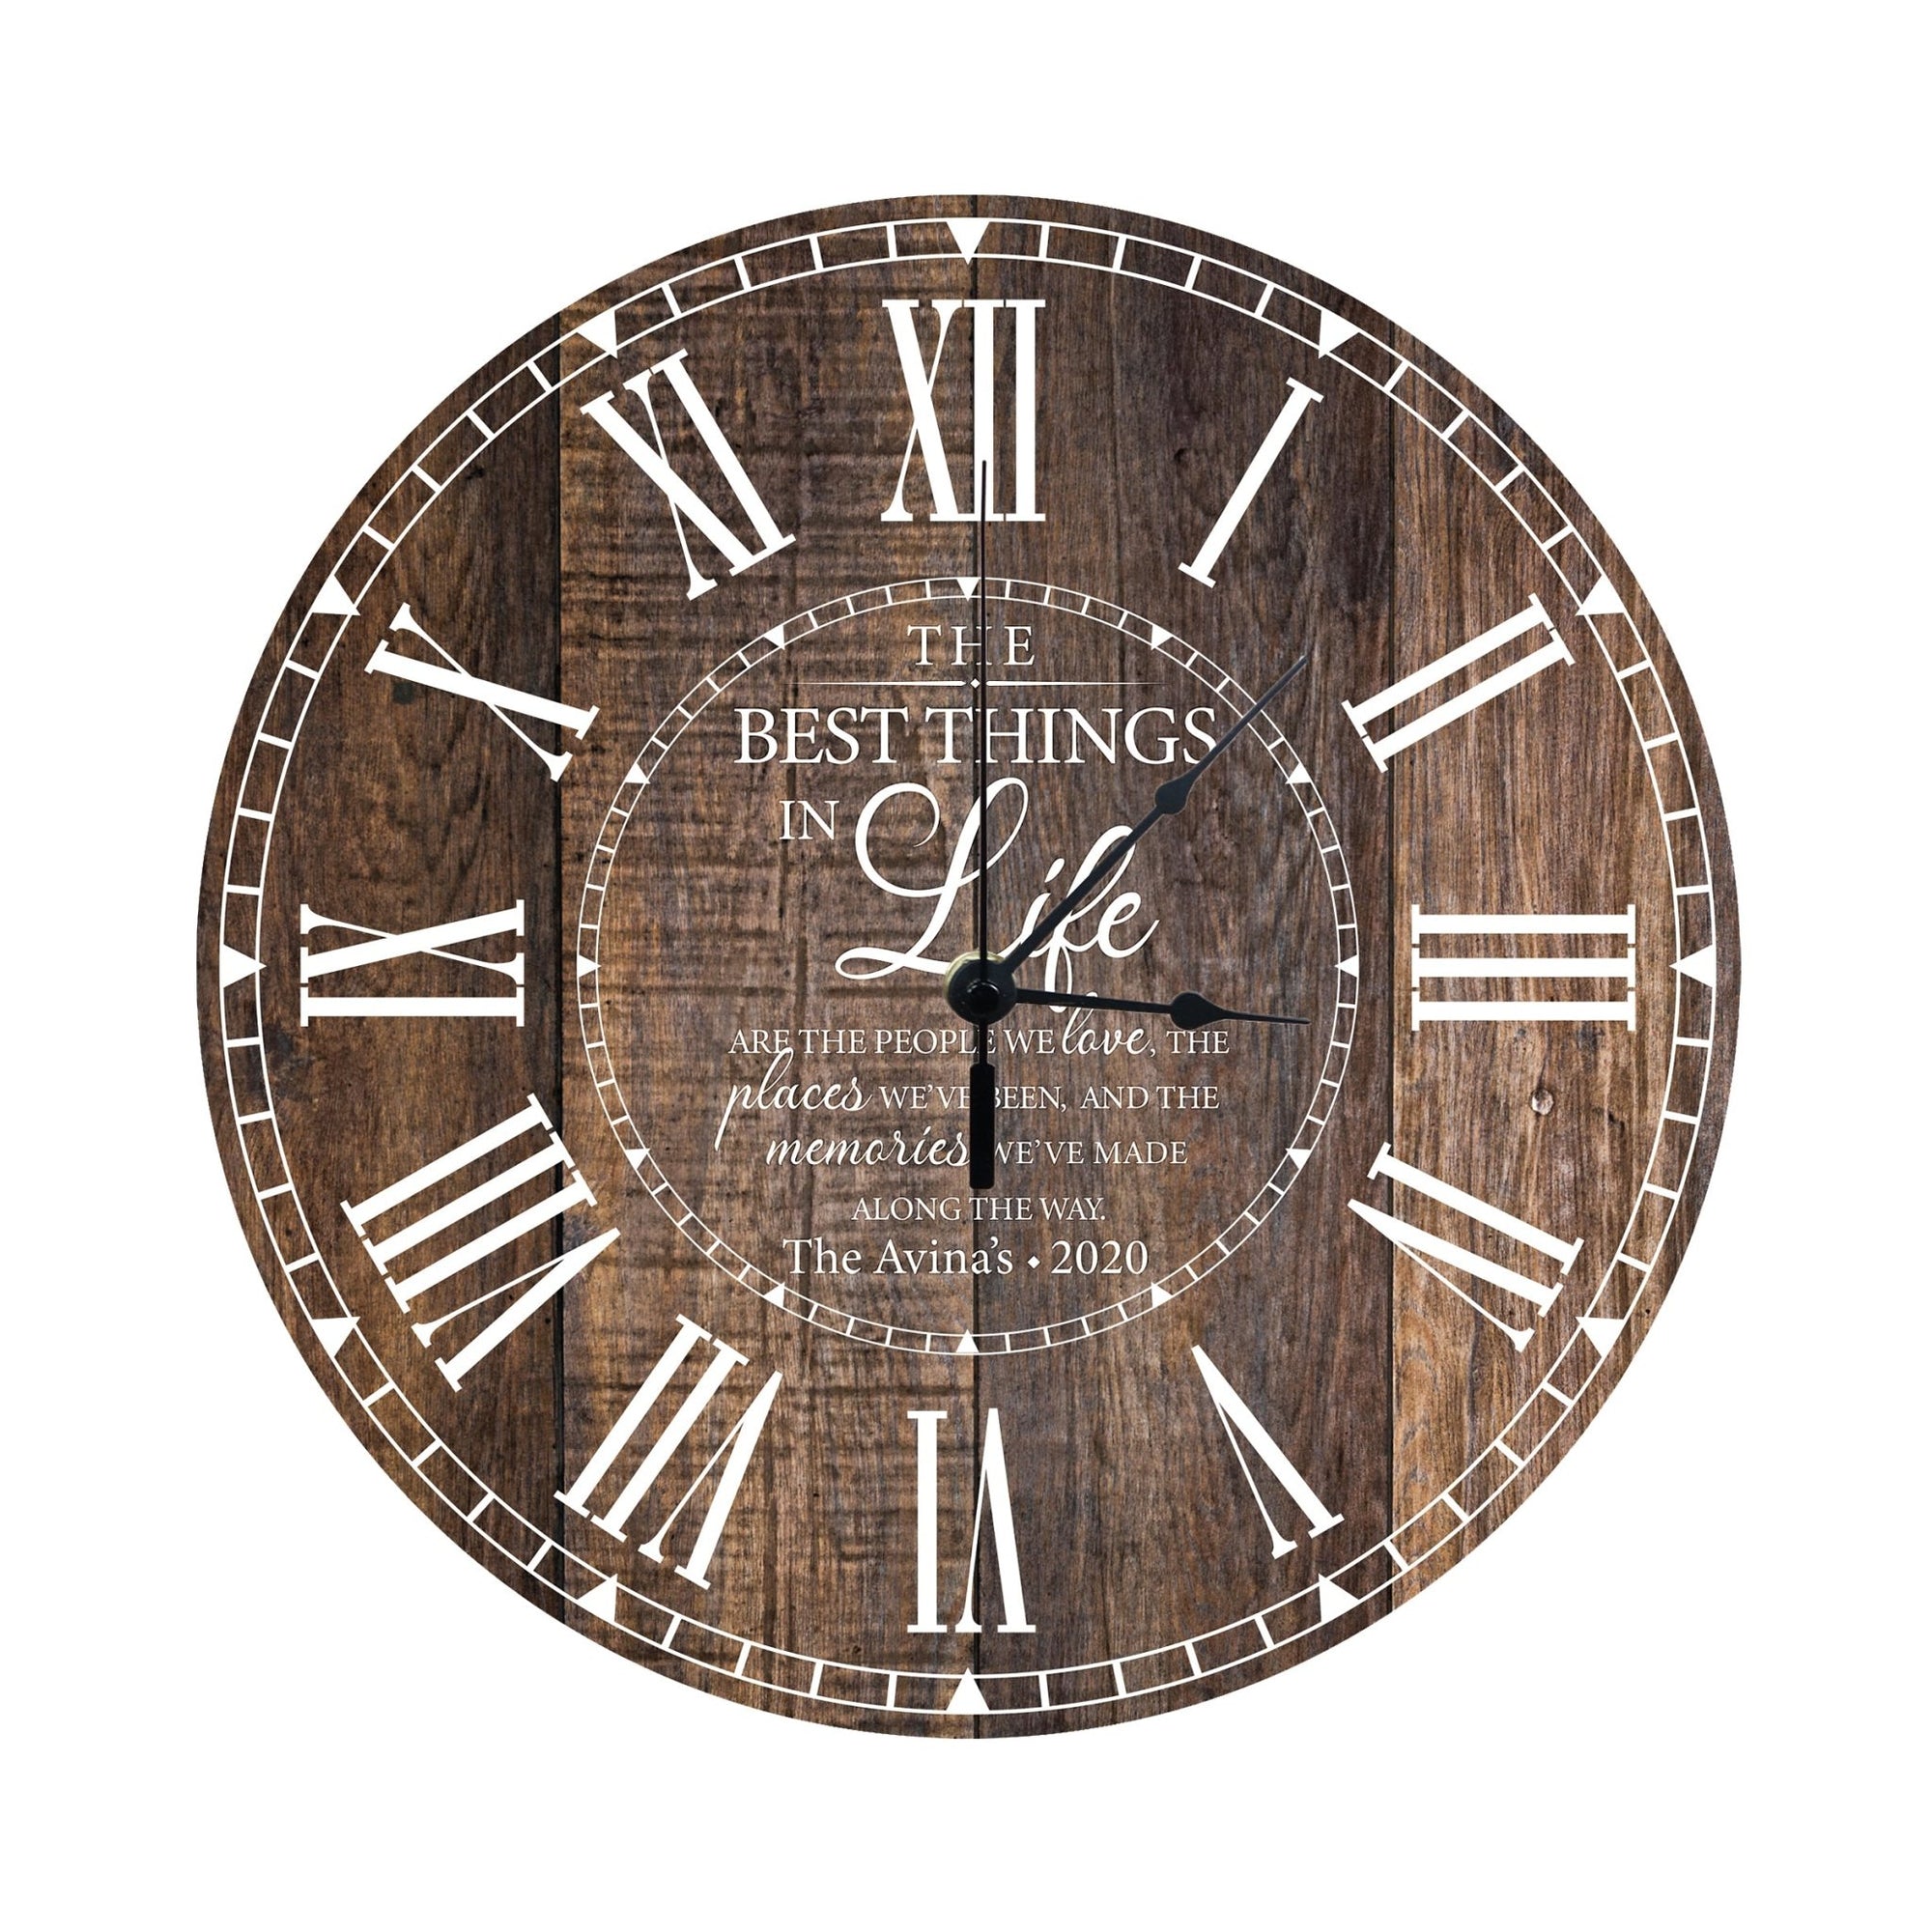 Personalized Inspirational Everyday Home and Family Wall Clock 12 x 12 x 0.125-(The Best Thing) - LifeSong Milestones